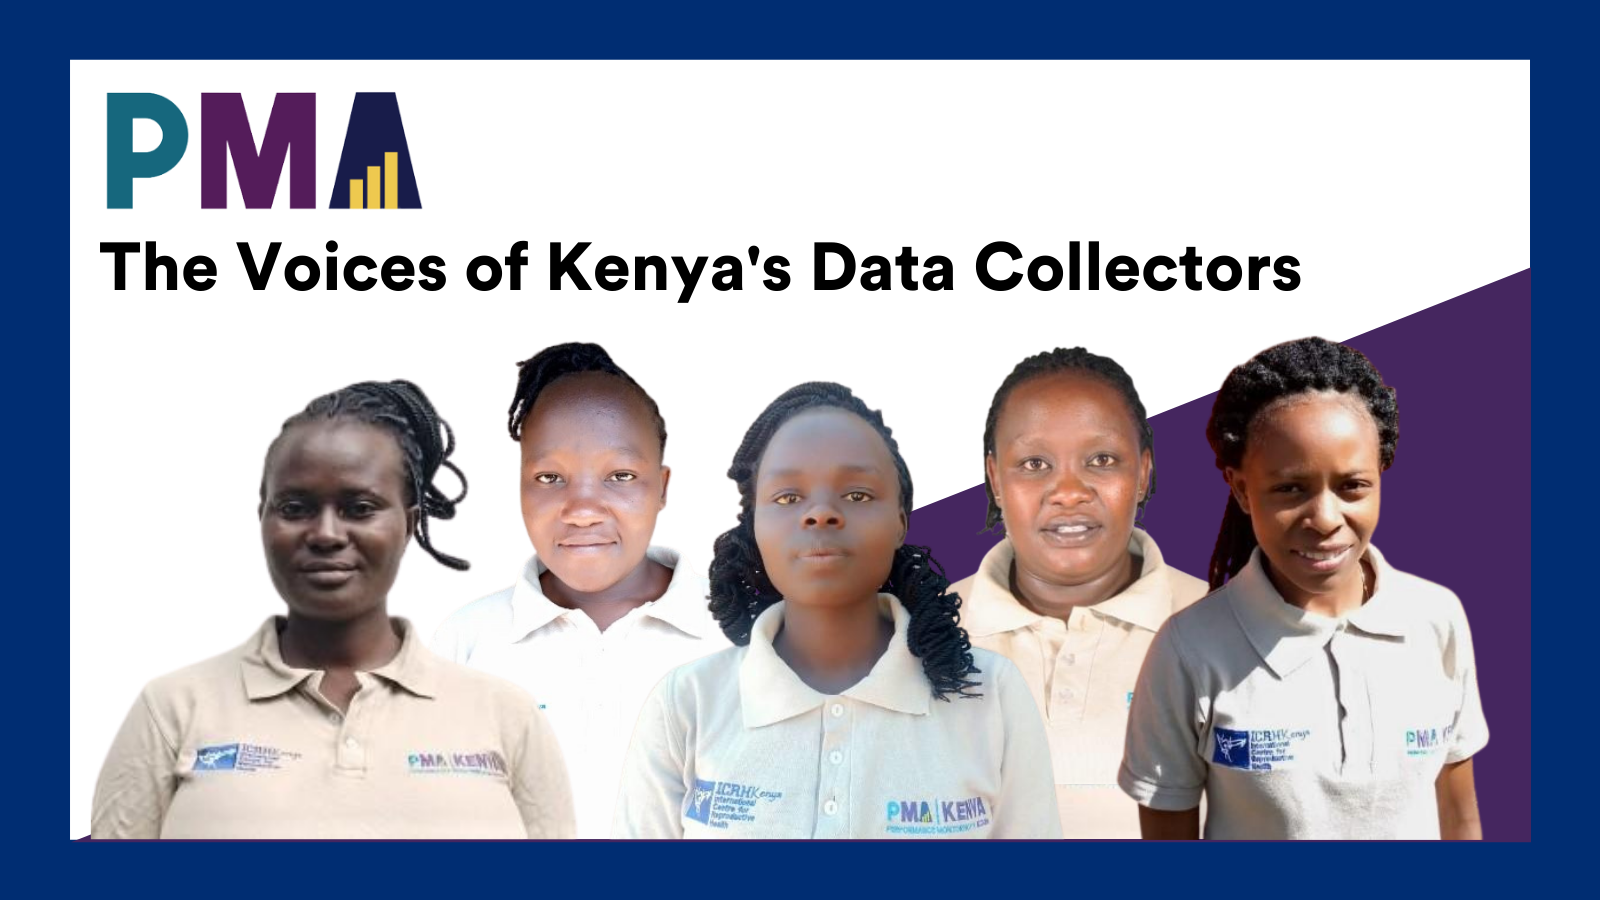 The Voices of Kenya’s Data Collectors